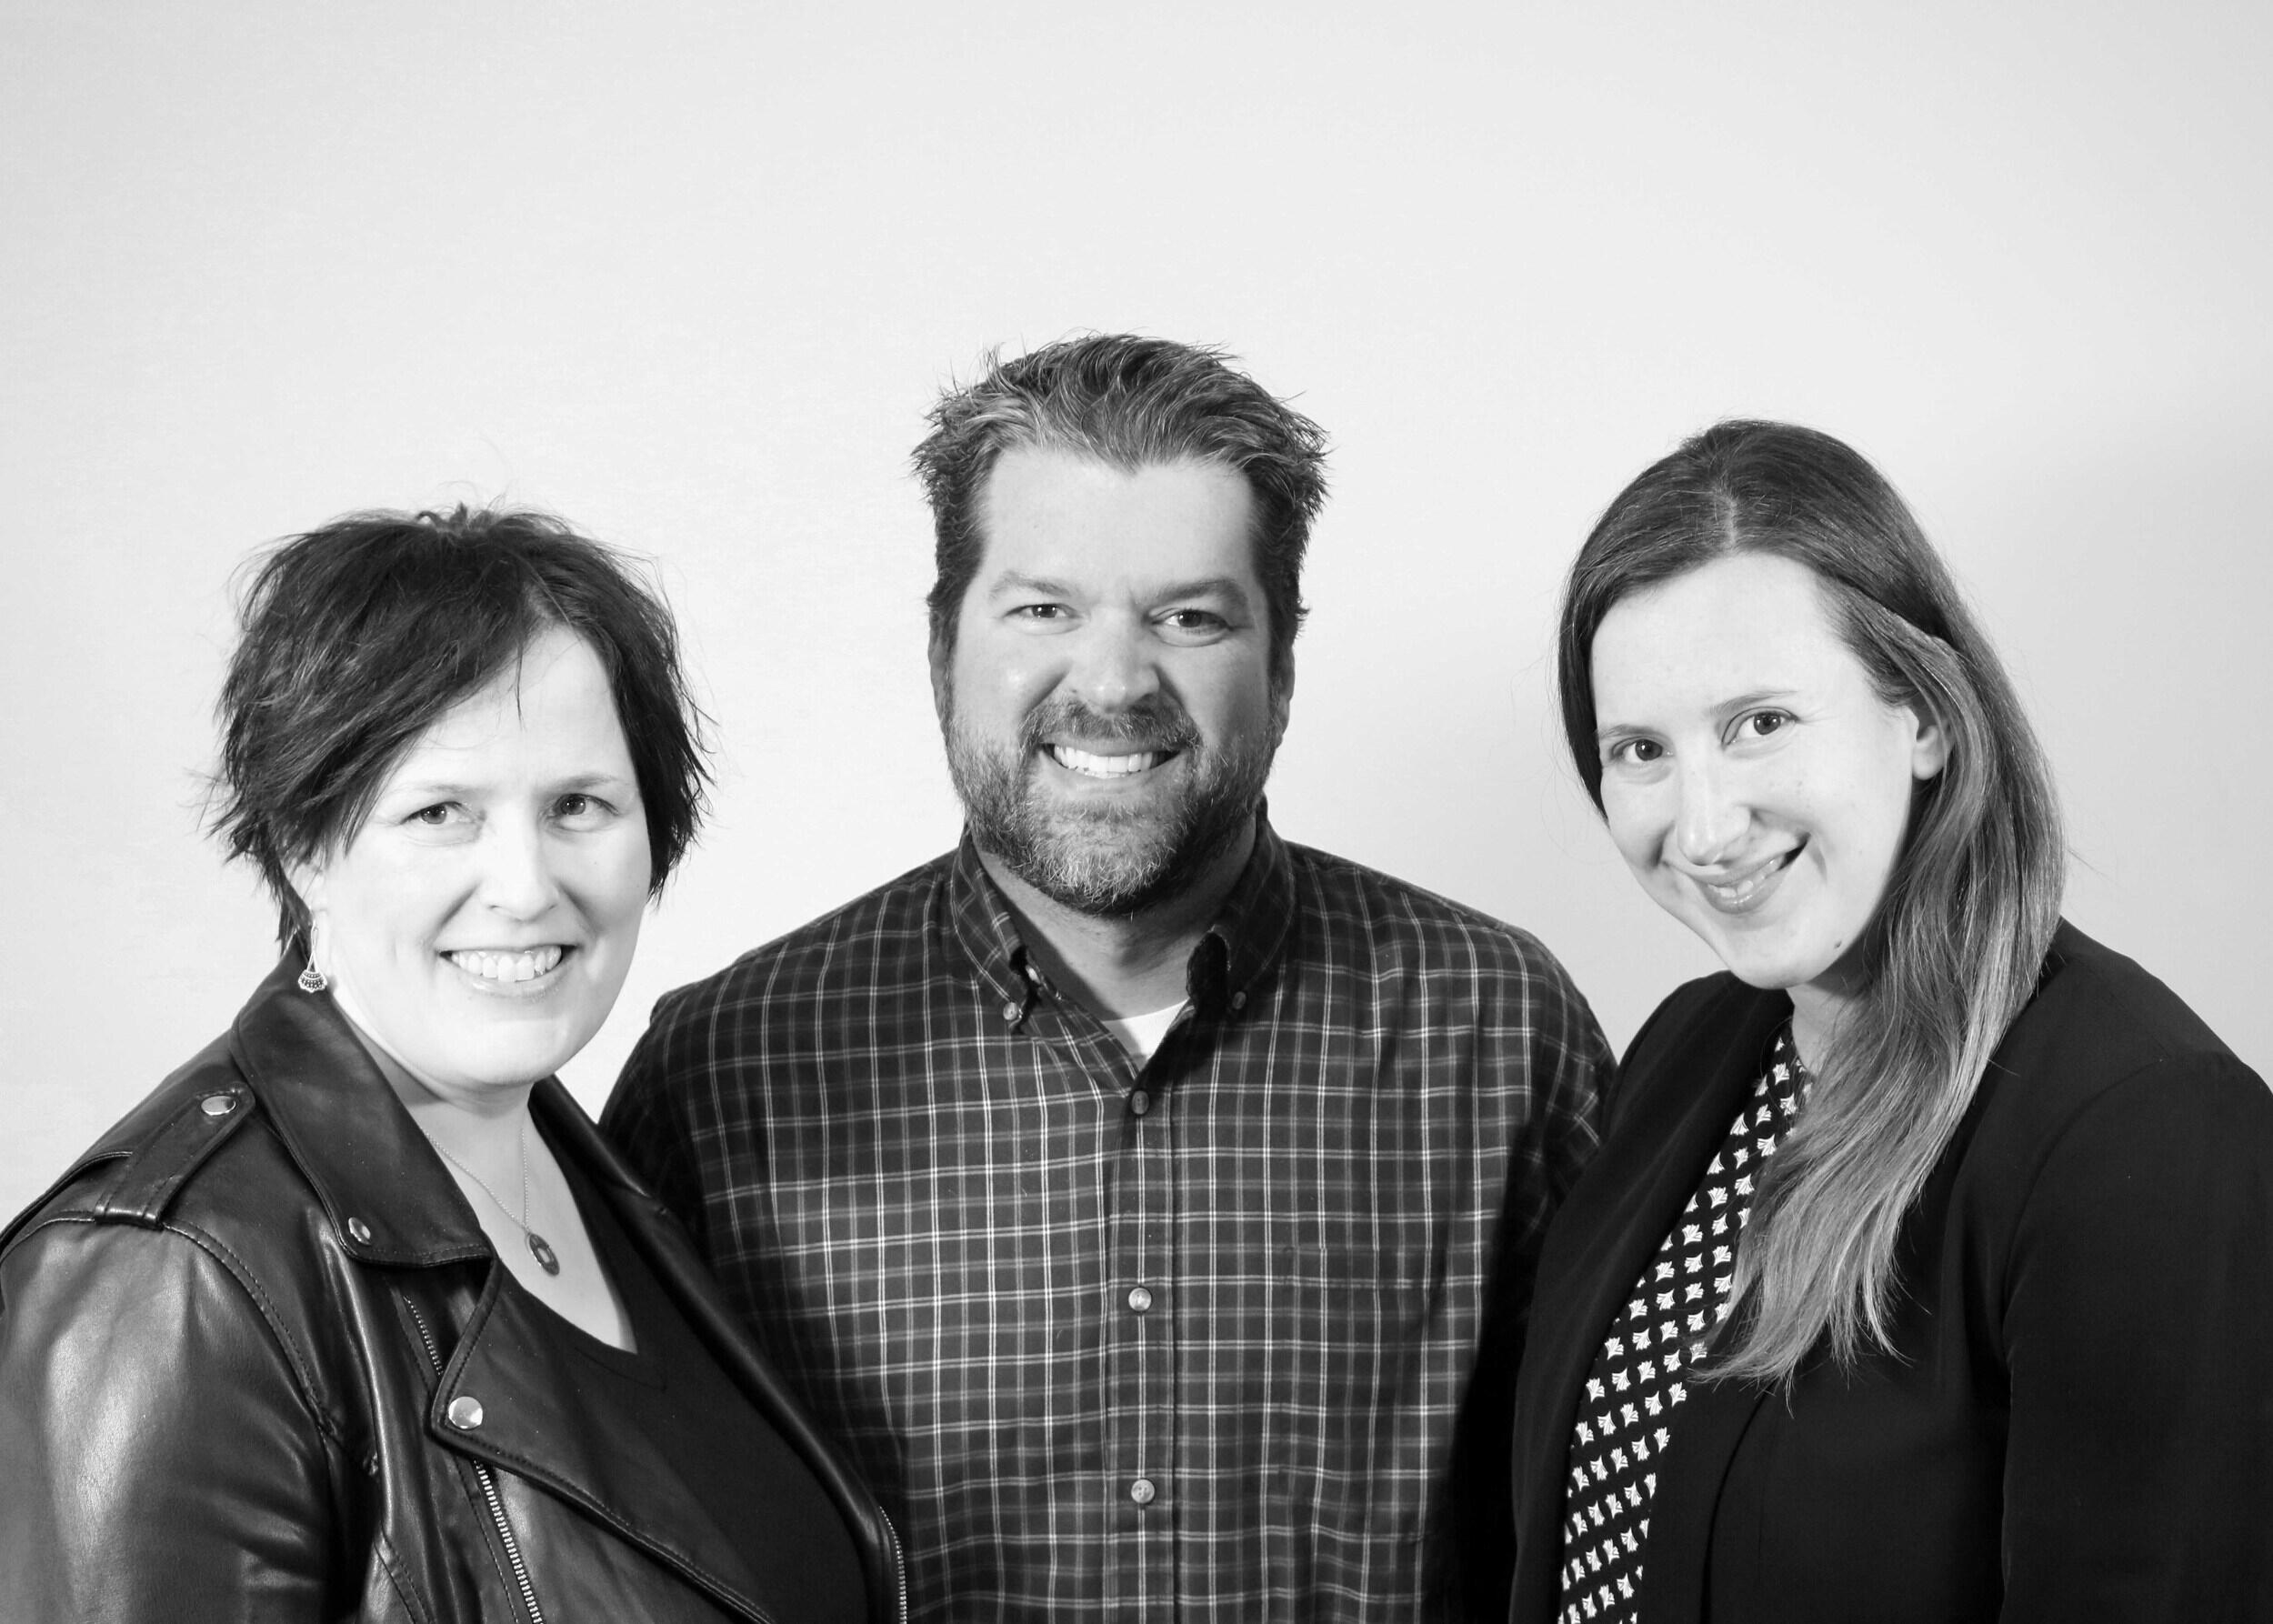 Jeanine Guidry, Ph.D., assistant professor of public relations, Jay Adams, an assistant professor of advertising, and Nicole O’Donnell, Ph.D., an assistant professor of public relations. (Contributed photo)